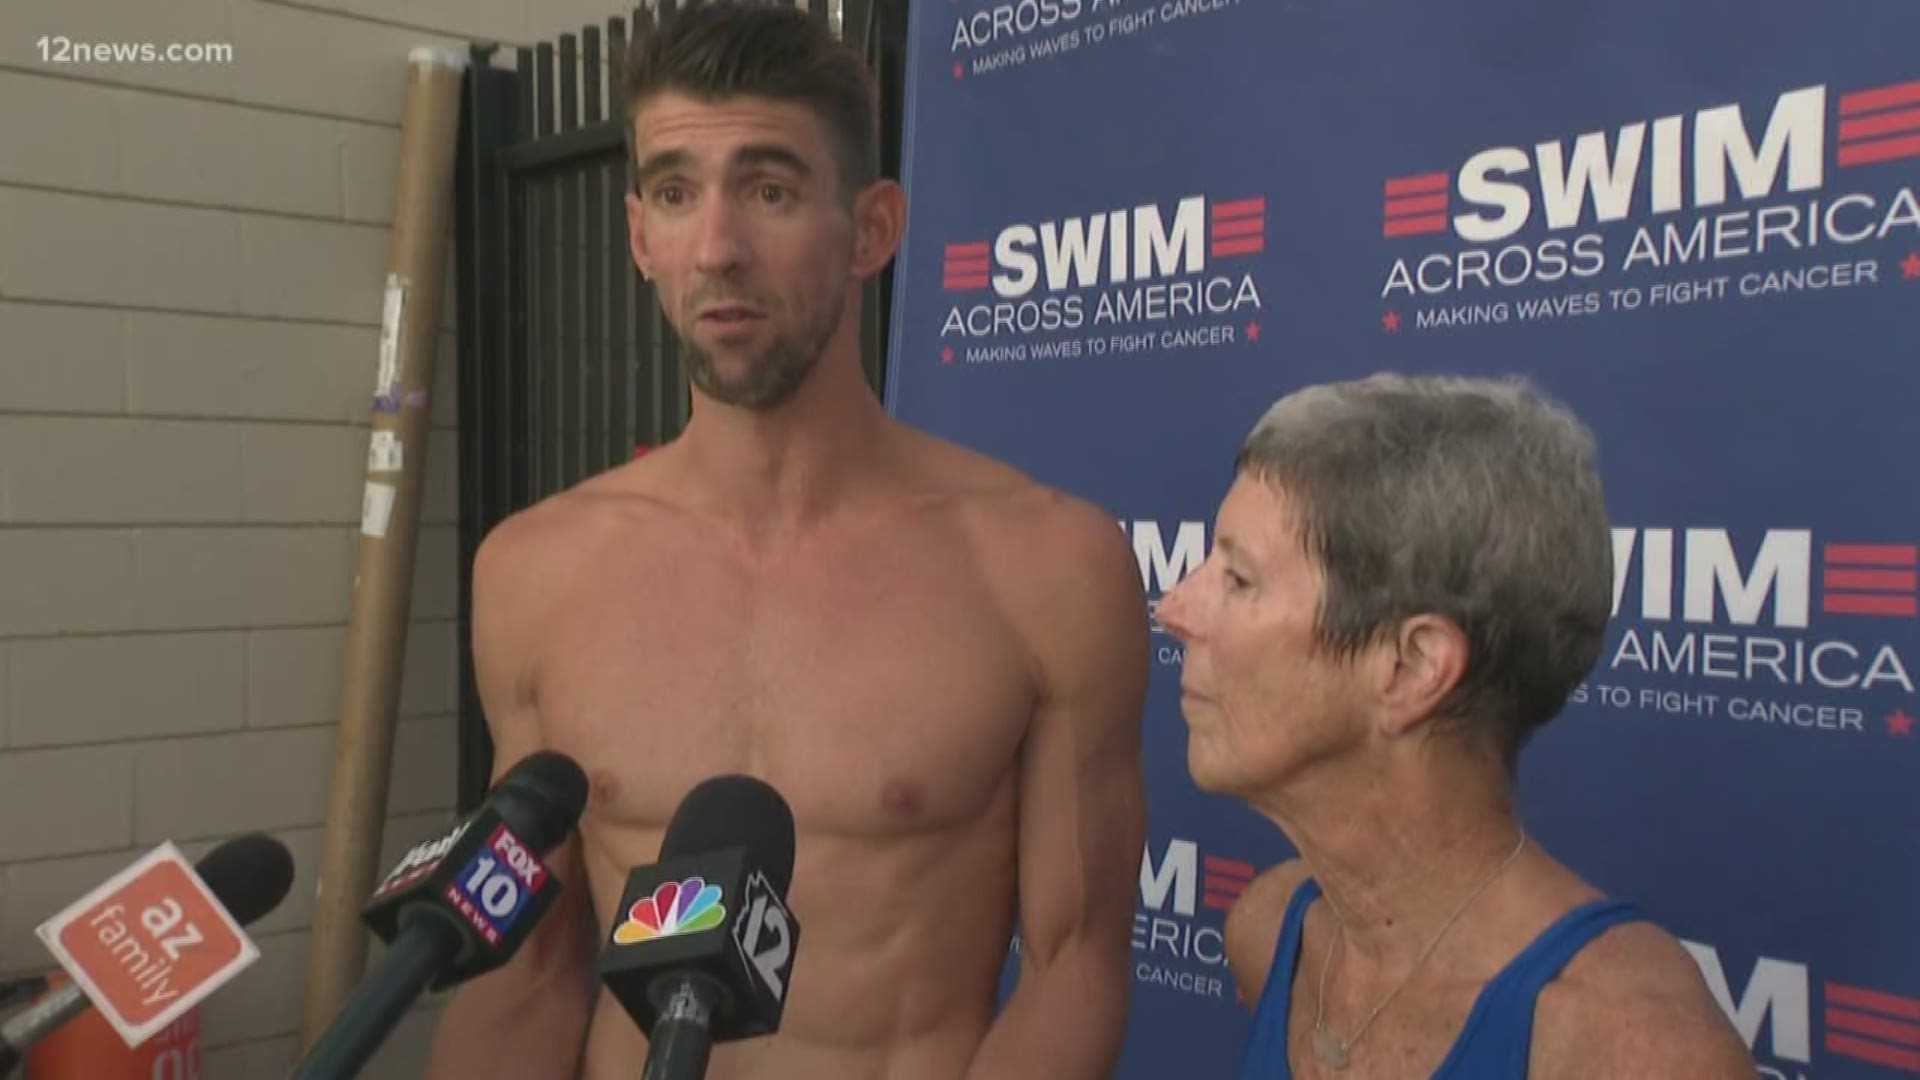 Michael Phelps was in Mesa helping kids learn how to swim as part of Swim Across America. Part of the effort was to raise money and awareness for cancer research.